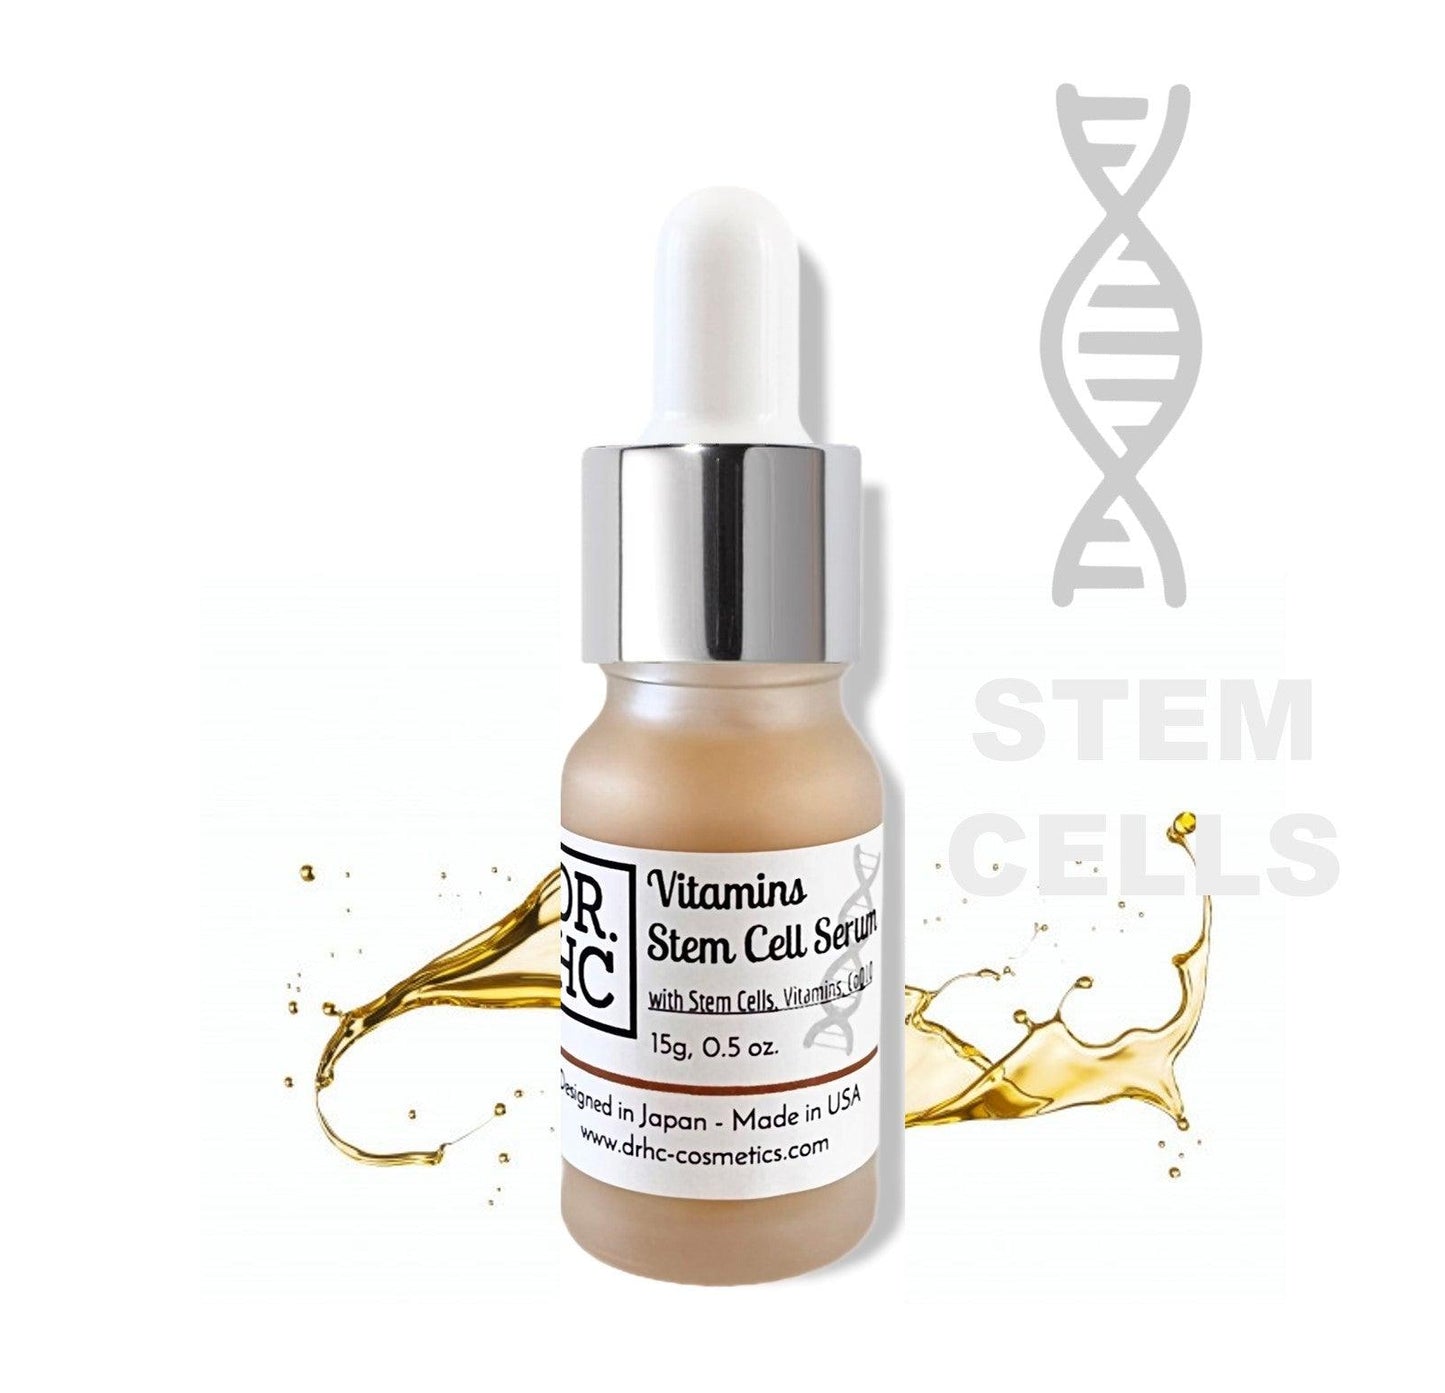 DR.HC Vitamins Stem Cell Serum (15g, 0.5oz.) (with Plant Stem Cells, Multi-Vitamins & CoQ10) (Skin recovery, Firming, Plumping, Age-reversing, Toning...)